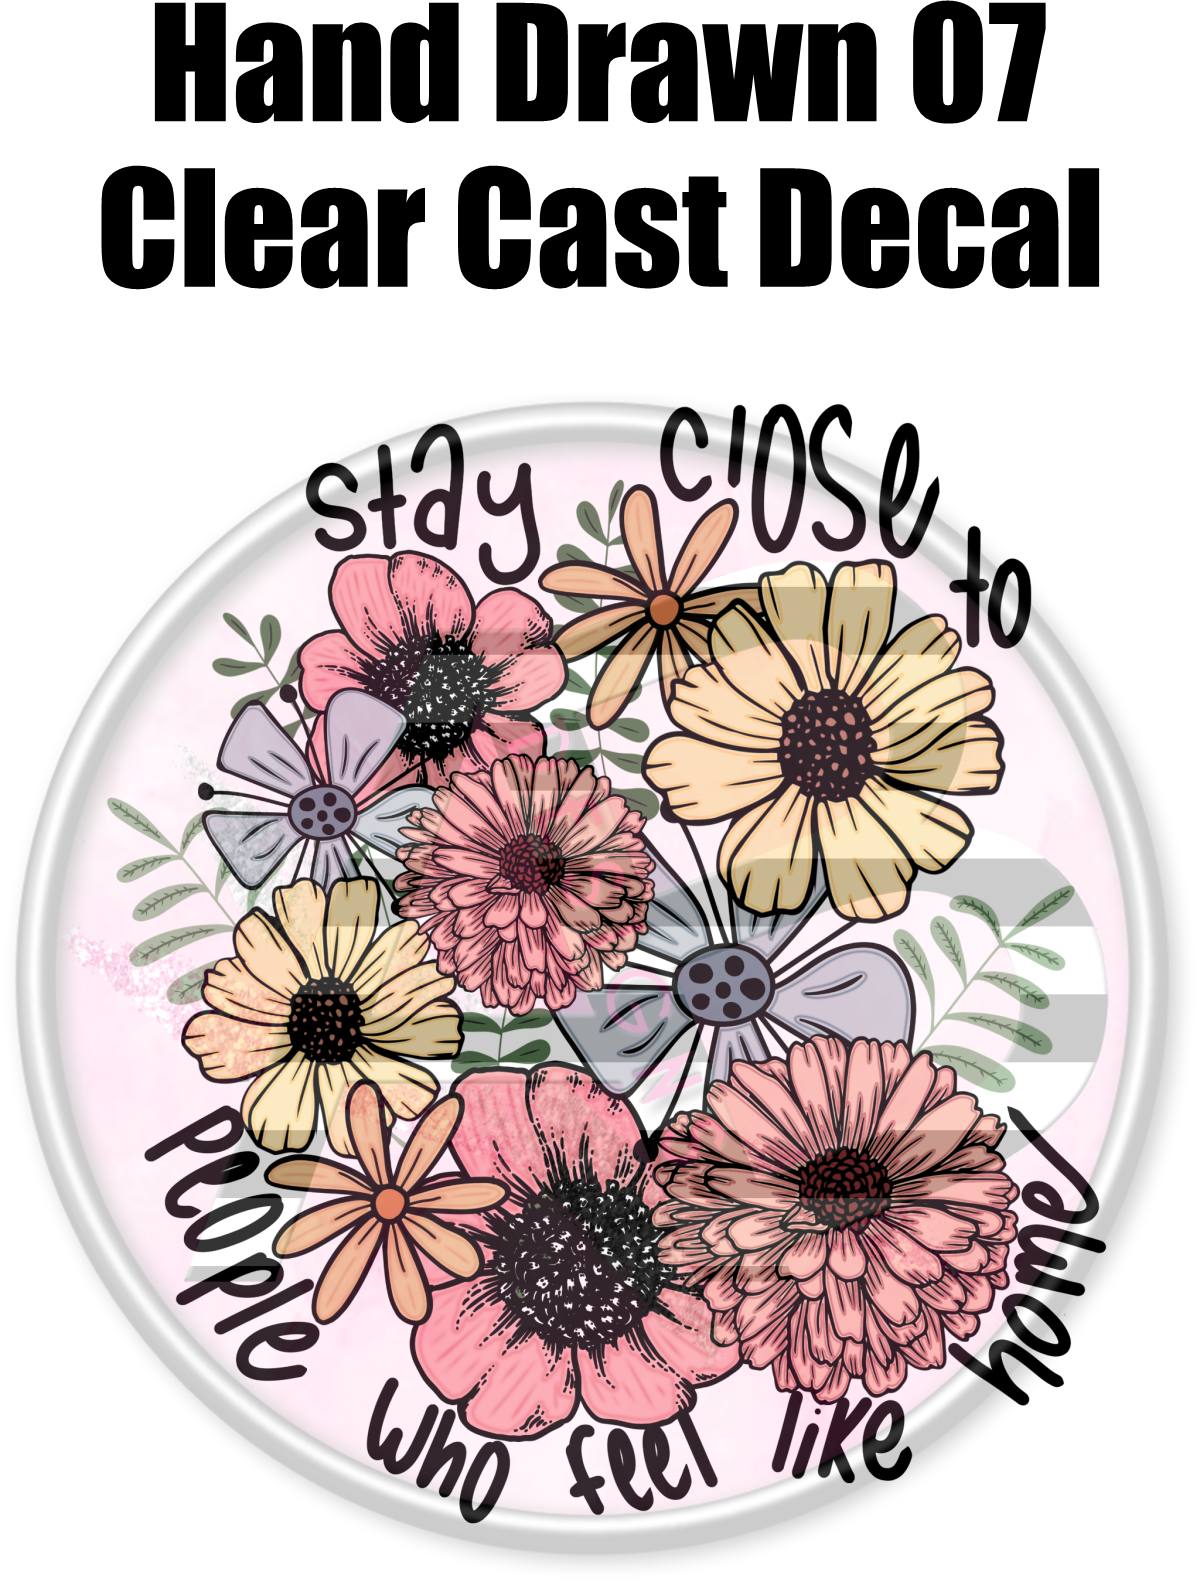 Hand Drawn 07 - Clear Cast Decal